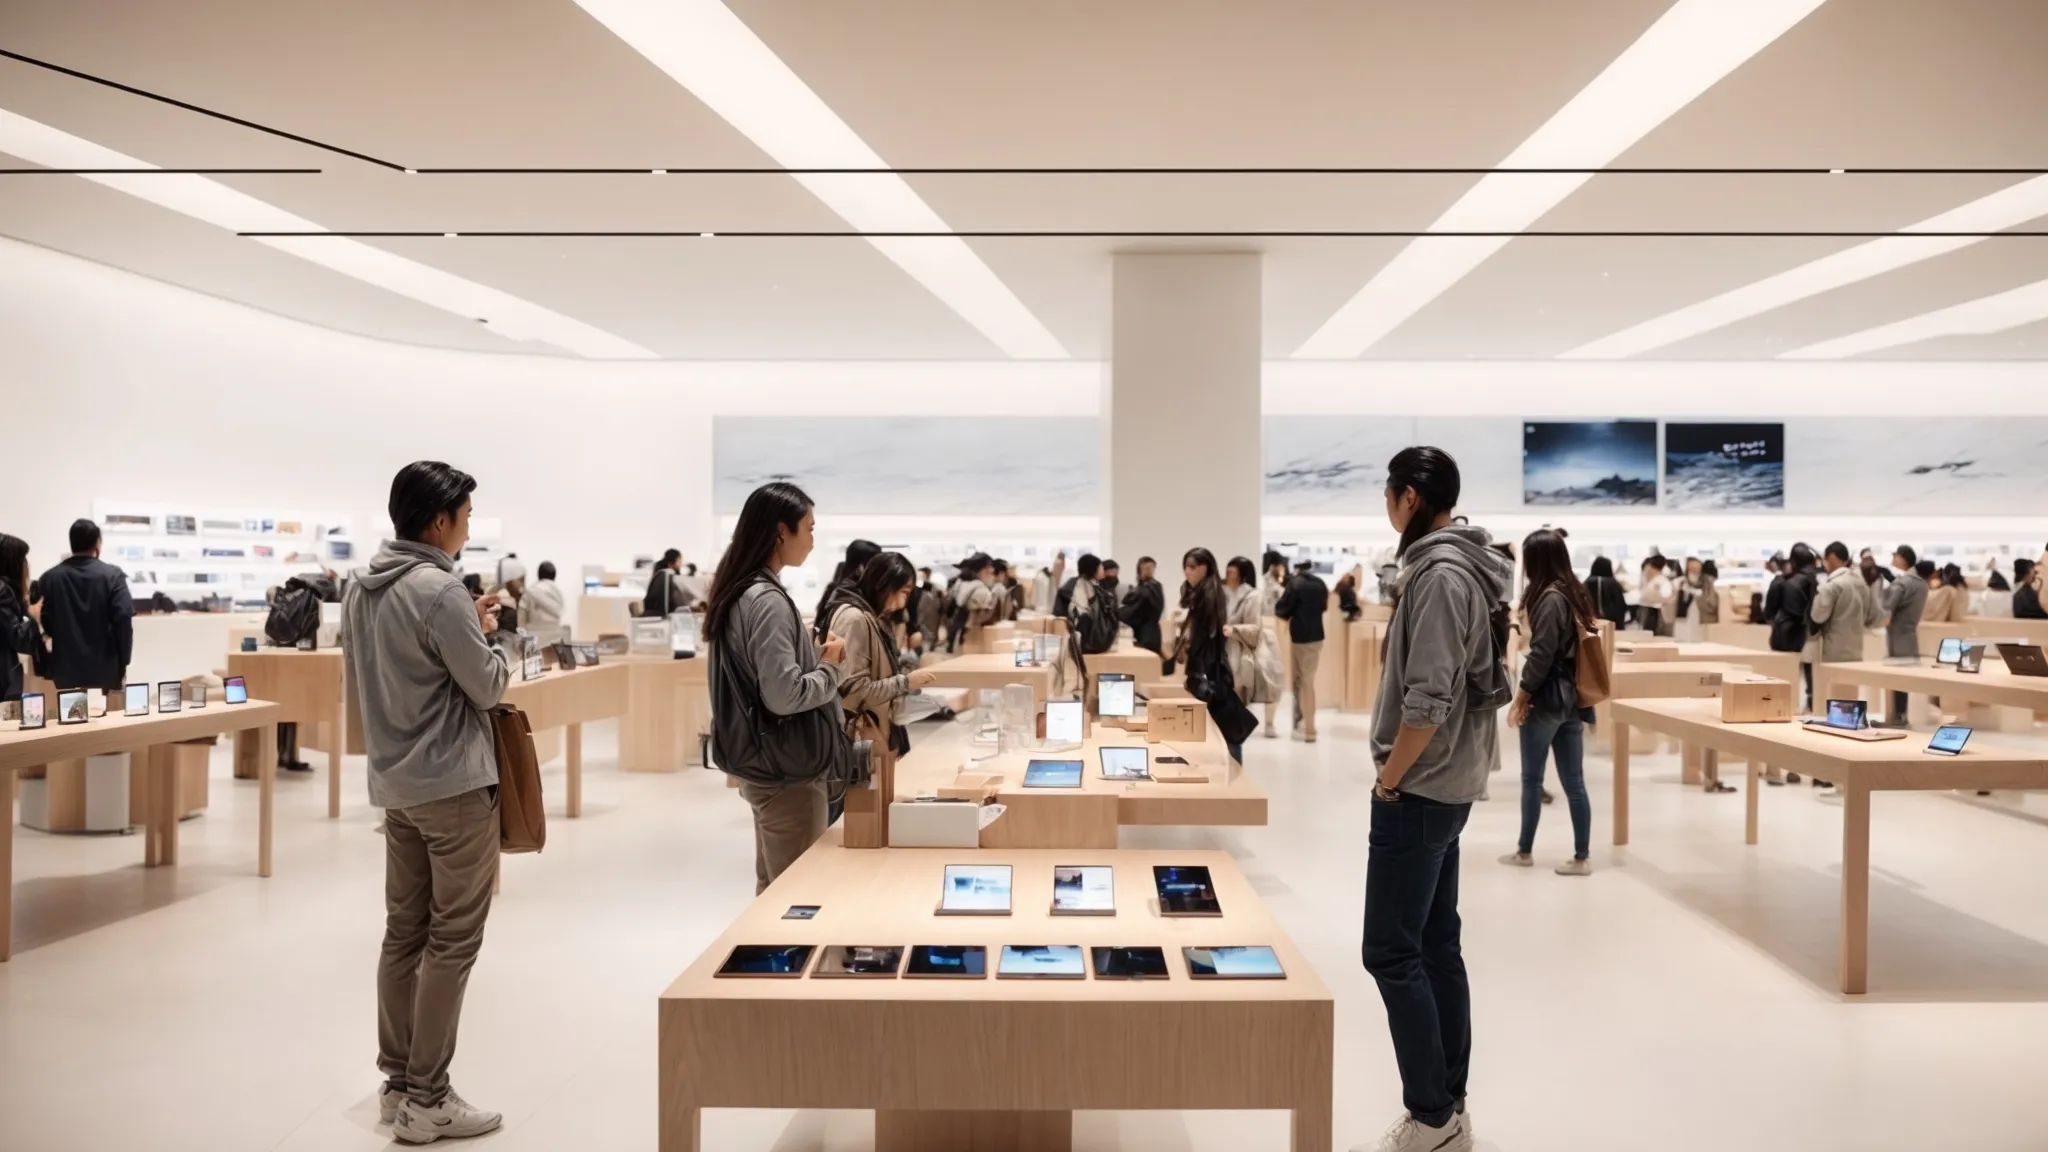 an apple store bustling with customers engaging with the latest devices amidst sleek, minimalist surroundings.